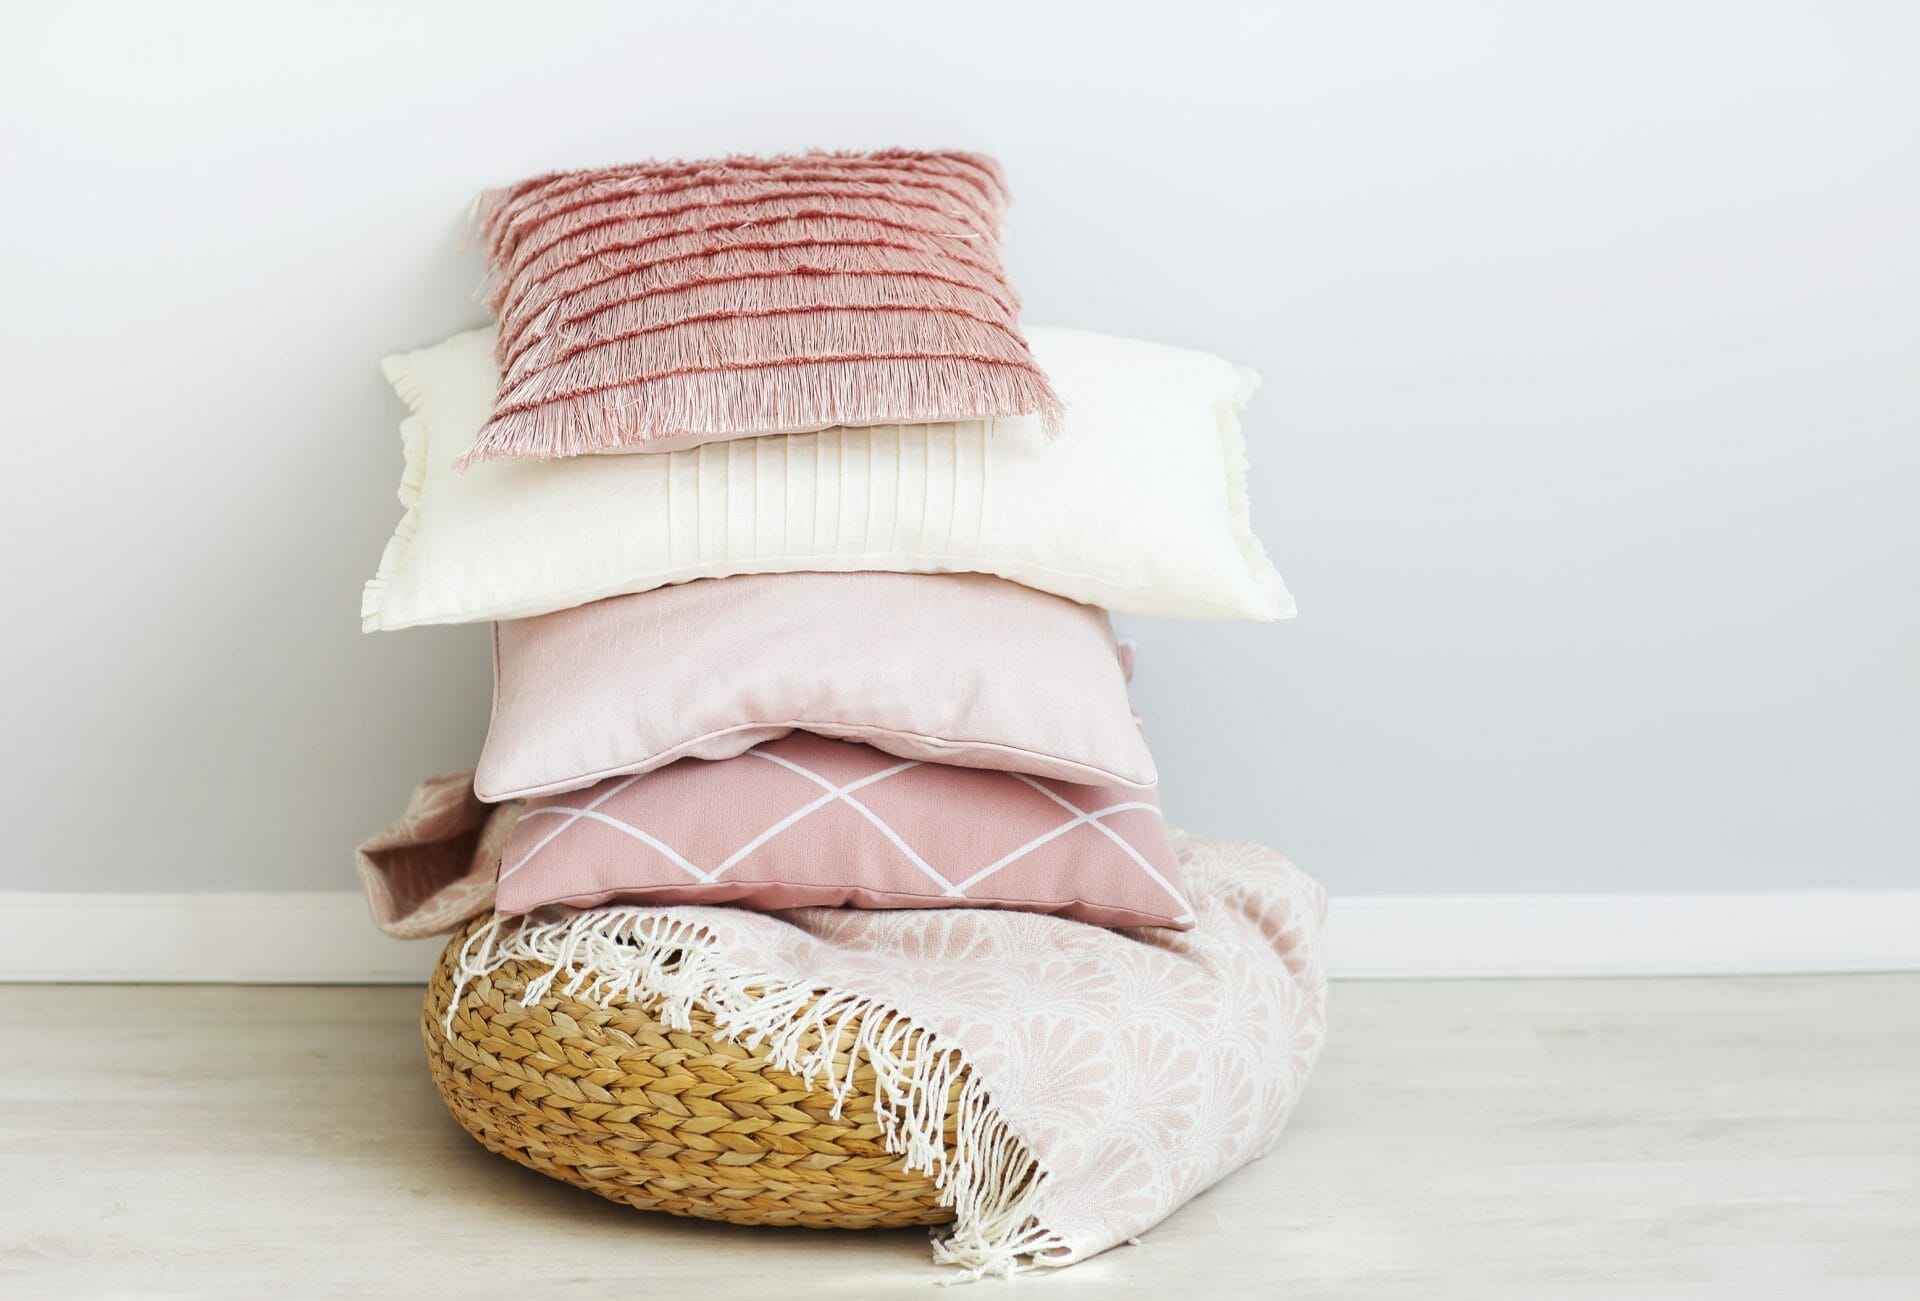 Should You Wash New Pillows? Tips for Keeping Them Fresh and Clean